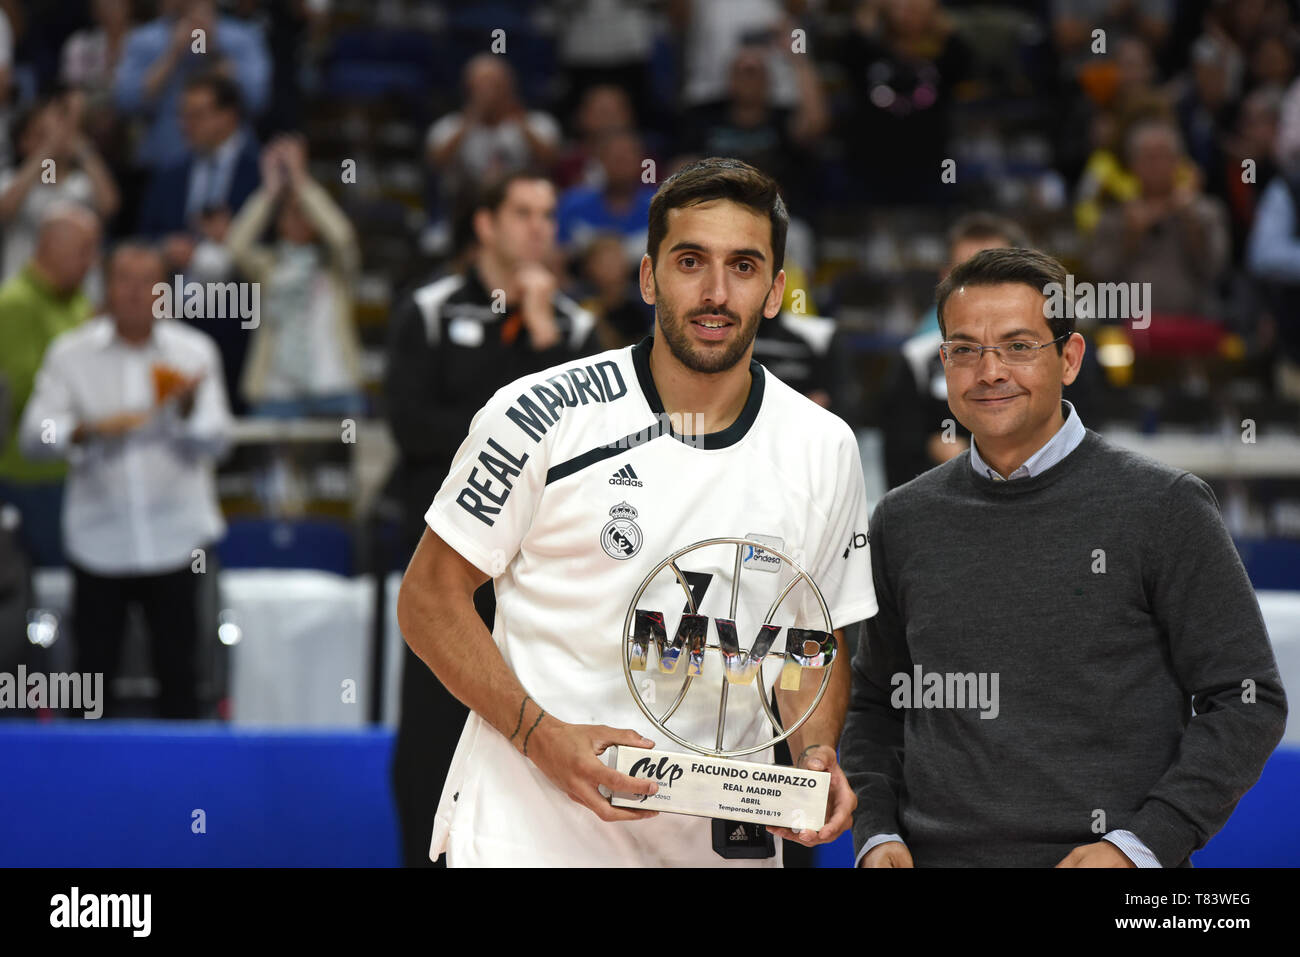 Facundo Campazzo, #11 of Real Madrid seen holding an MVP trophy during the 2018/2019 Liga Endesa Regular Season Game (day 31) between Real Madrid and Movistar Estudiantes at WiZink center in Madrid. Final Score: Real Madrid 109 - 92 Movistar Estudiantes. Stock Photo